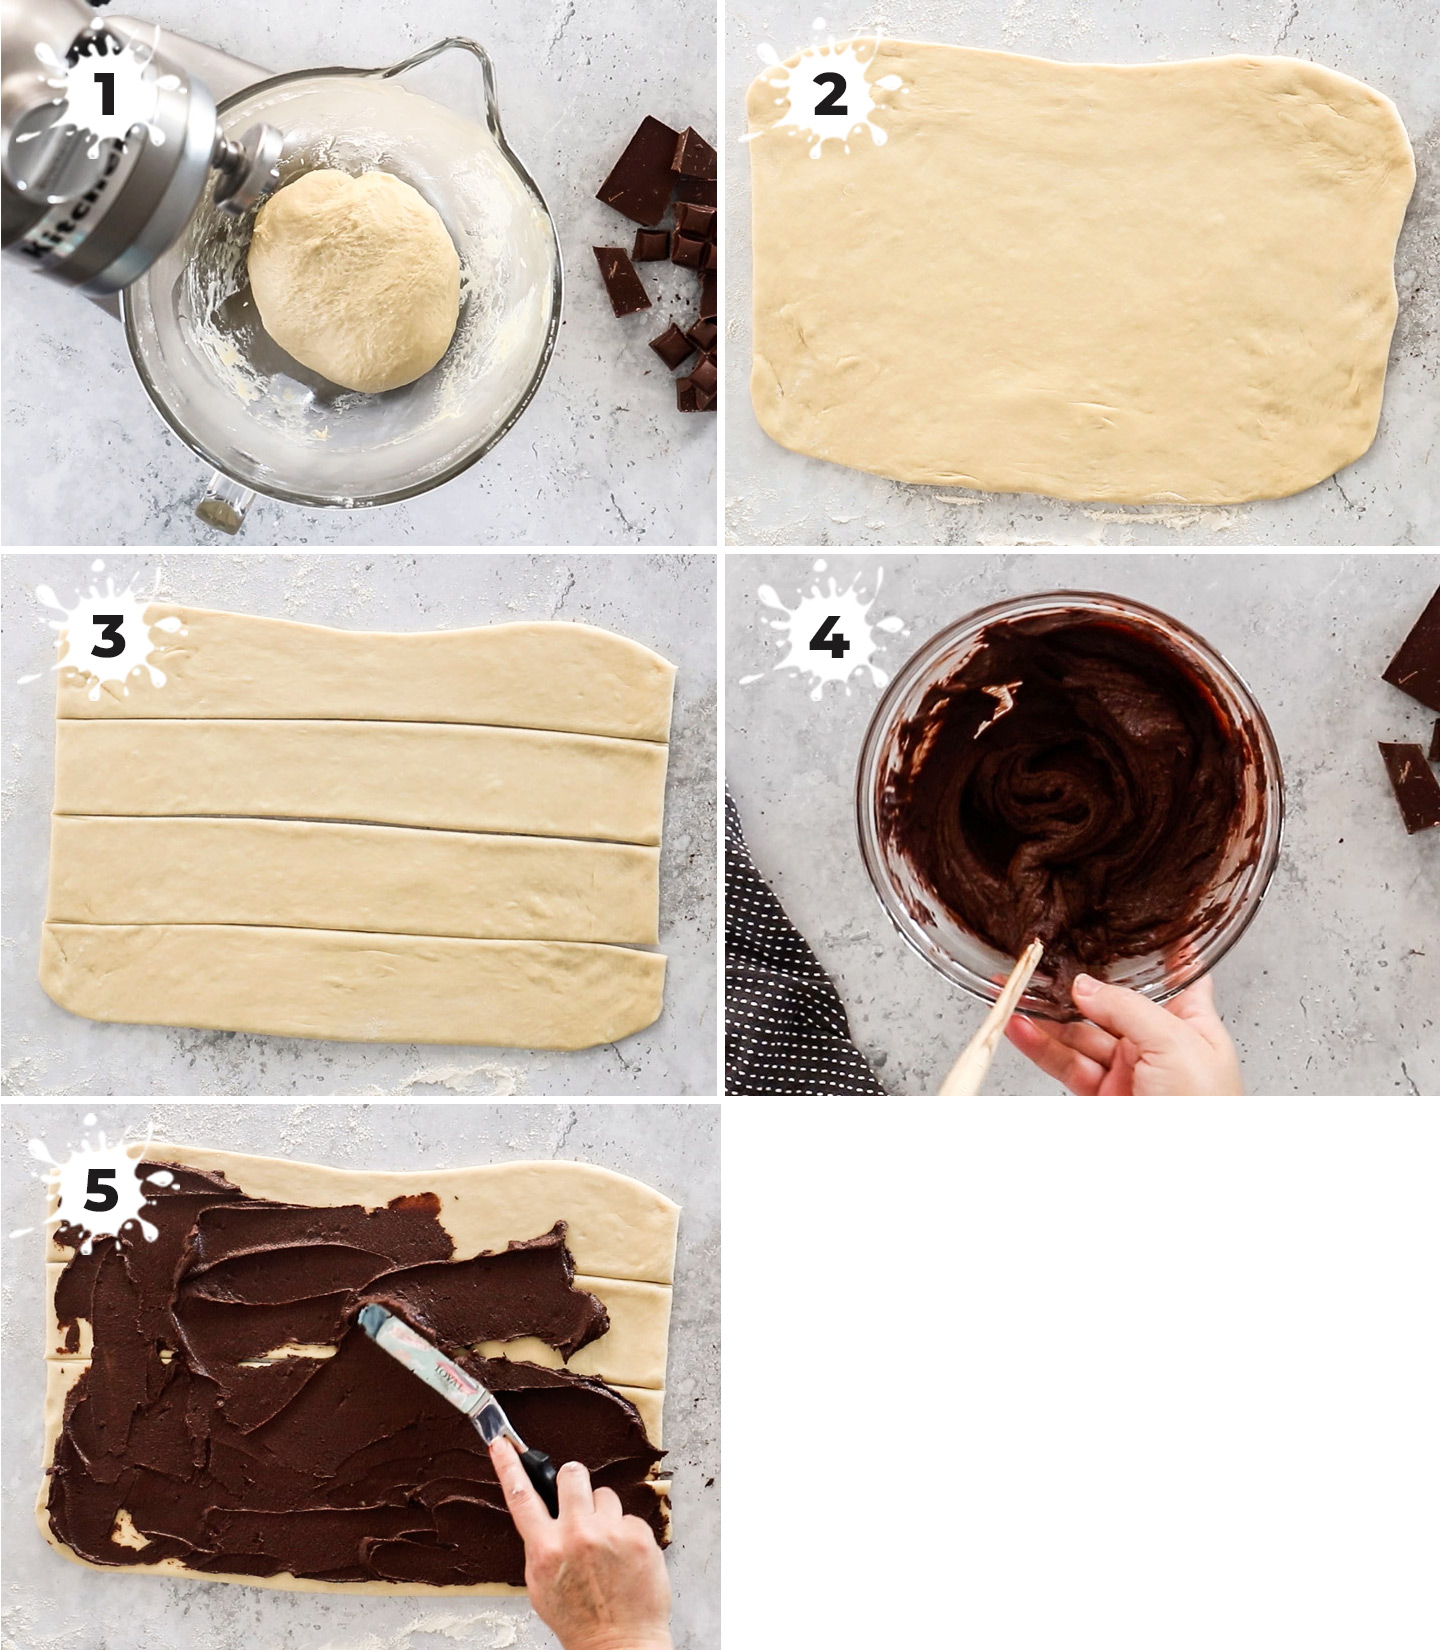 A collage showing how to make the dough for chocolate scroll.